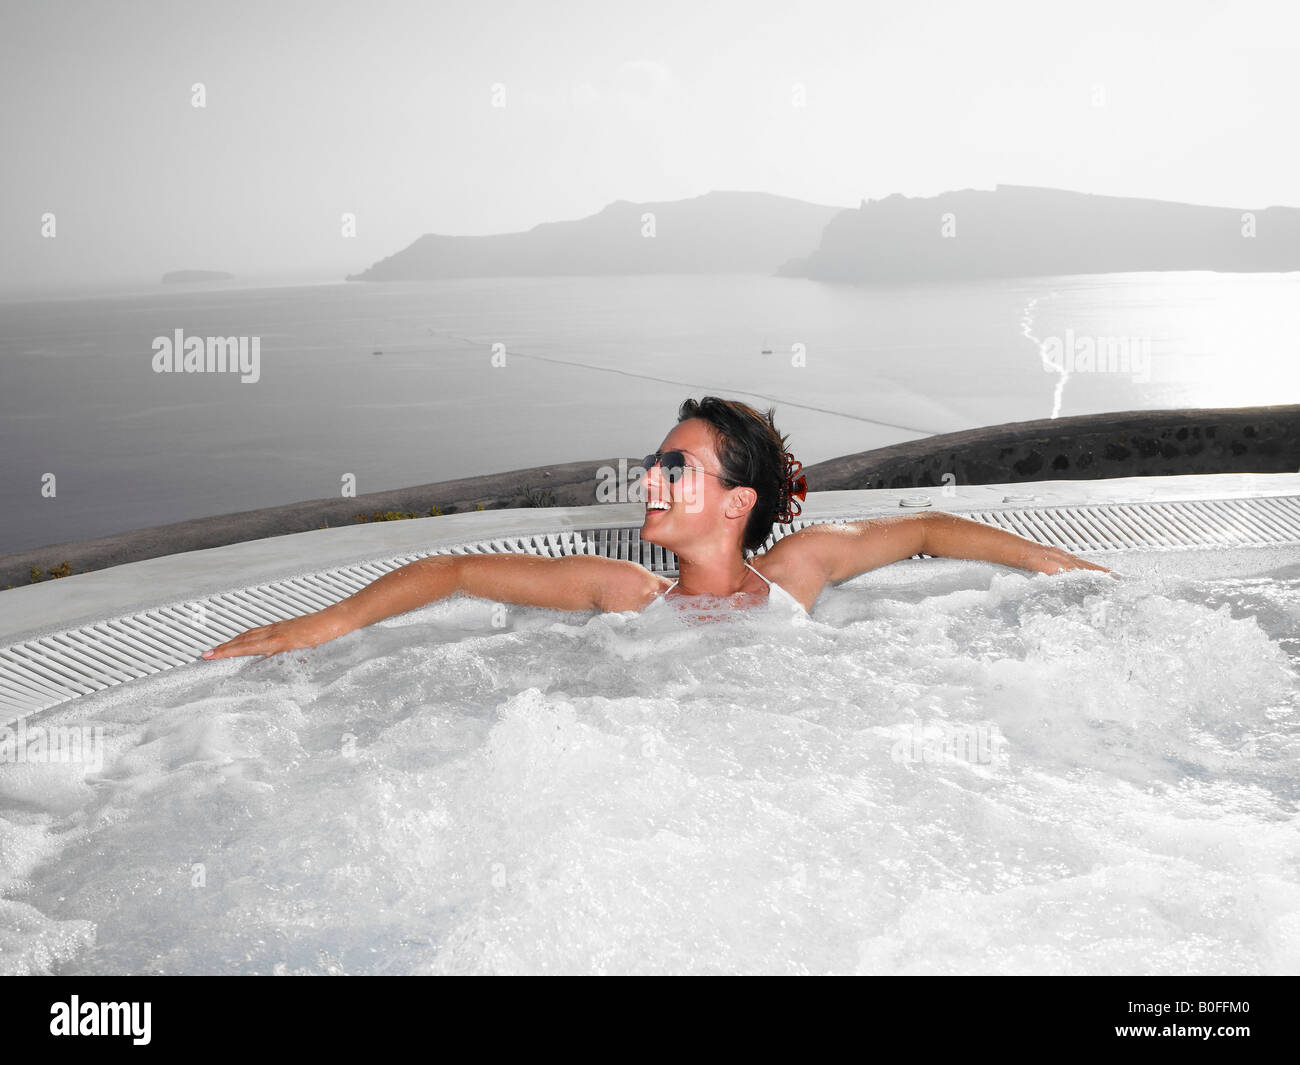 Woman in hot tub Stock Photo